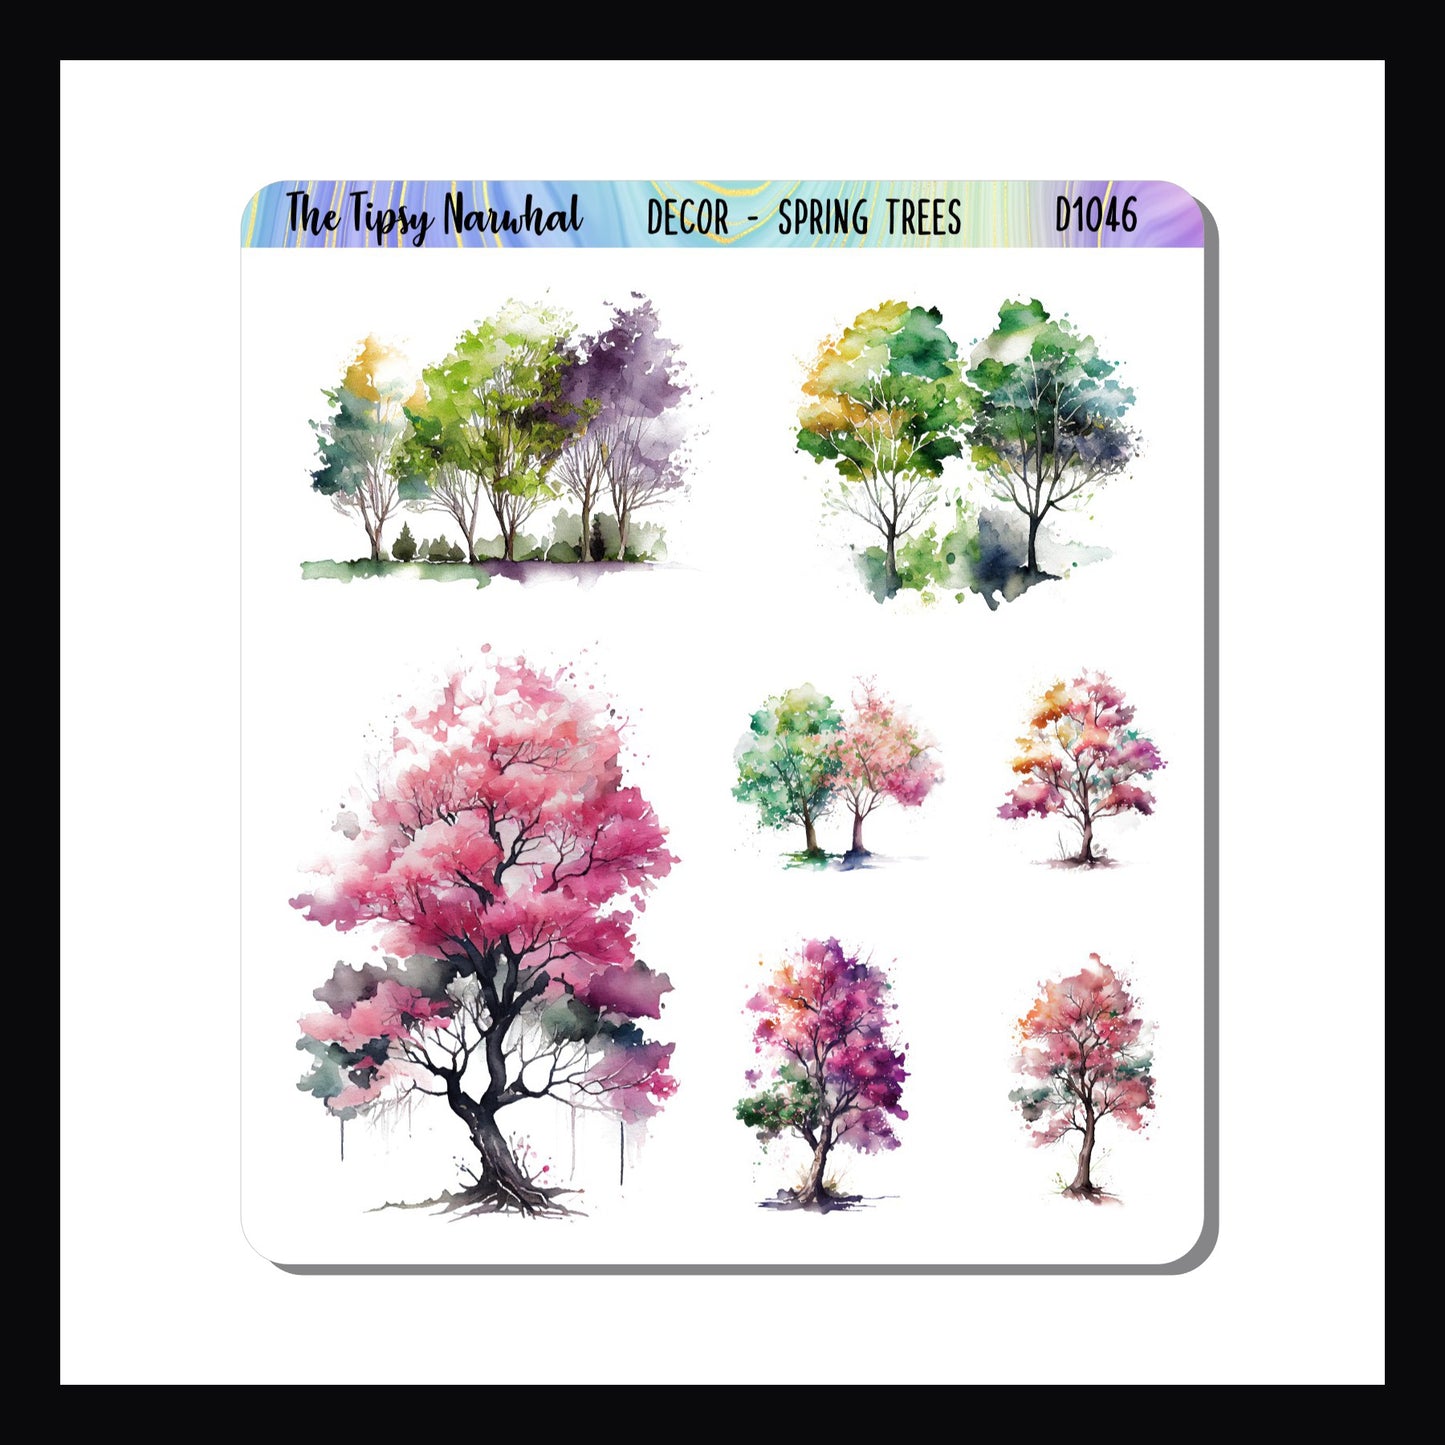 The Digital Spring Trees Decor Sheet is a digital/printable version of the Spring Trees Decor Sheet.  The sheet features 7 stickers of various sizes all depicting trees in the springtime.